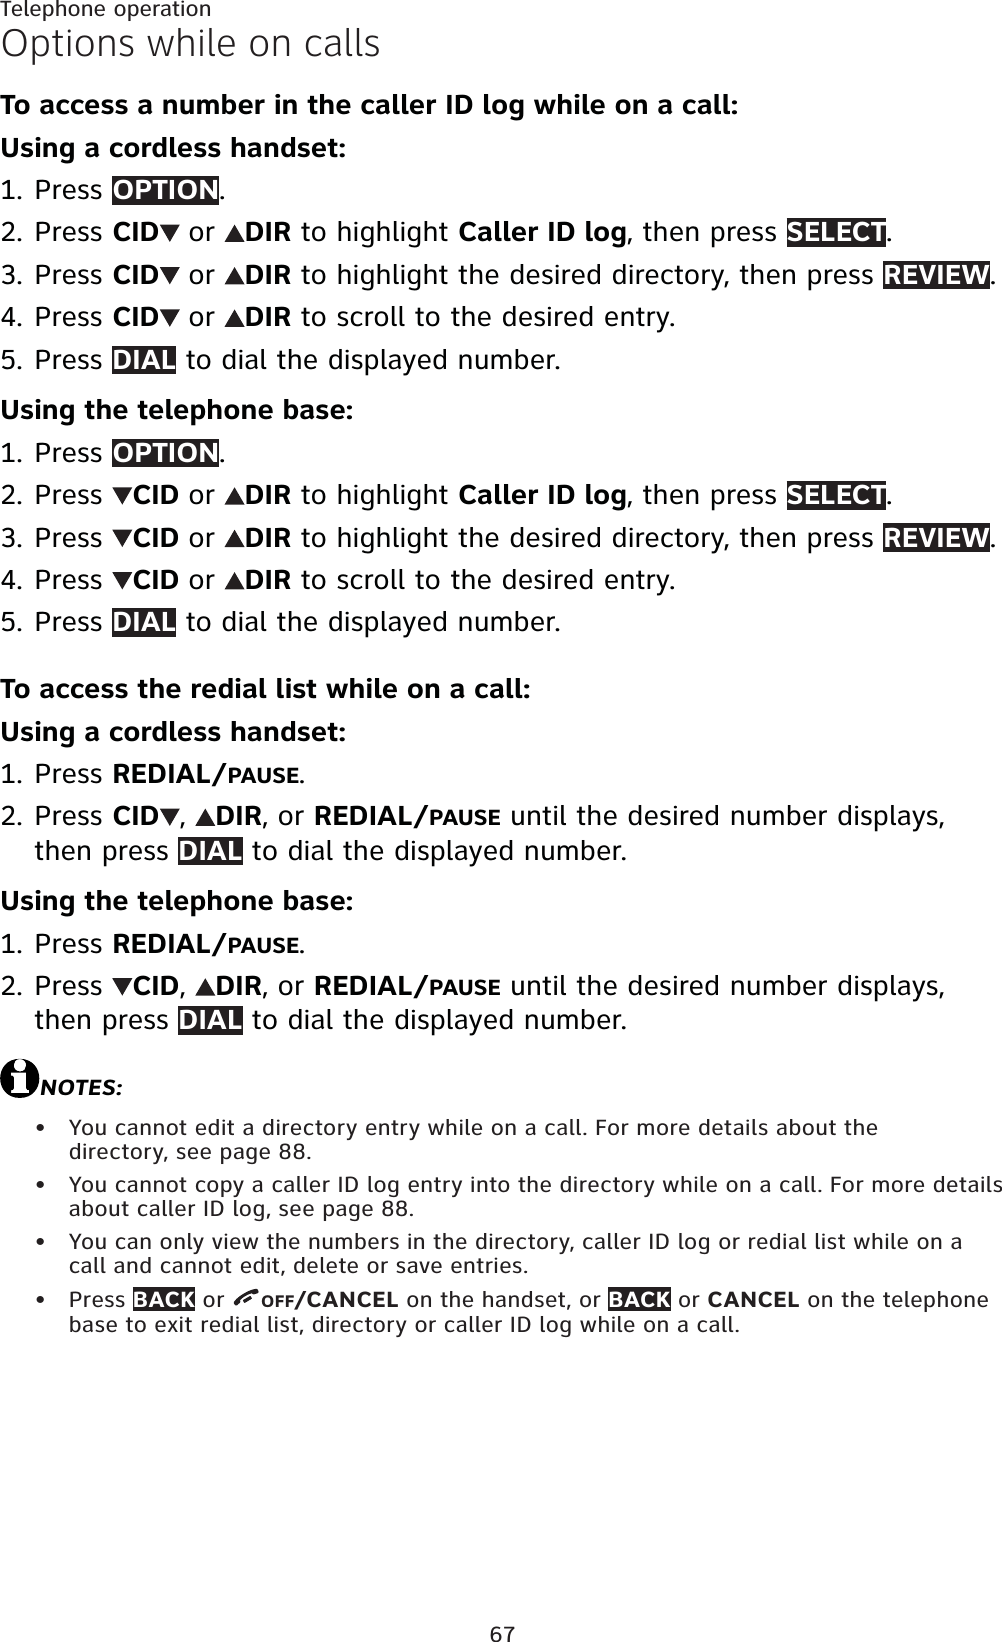 67Telephone operationOptions while on callsTo access a number in the caller ID log while on a call:Using a cordless handset:Press OPTION.Press CID or DIR to highlight Caller ID log, then press SELECT.Press CID or DIR to highlight the desired directory, then press REVIEW.Press CID or DIR to scroll to the desired entry.Press DIAL to dial the displayed number.Using the telephone base:Press OPTION.Press  CID or DIR to highlight Caller ID log, then press SELECT.Press  CID or DIR to highlight the desired directory, then press REVIEW.Press  CID or DIR to scroll to the desired entry.Press DIAL to dial the displayed number.To access the redial list while on a call:Using a cordless handset:Press REDIAL/PAUSE.Press CID ,DIR,orREDIAL/PAUSE until the desired number displays, then press DIAL to dial the displayed number.Using the telephone base:Press REDIAL/PAUSE.Press  CID,DIR,orREDIAL/PAUSE until the desired number displays, then press DIAL to dial the displayed number.NOTES:You cannot edit a directory entry while on a call. For more details about the directory, see page 88.You cannot copy a caller ID log entry into the directory while on a call. For more details about caller ID log, see page 88.You can only view the numbers in the directory, caller ID log or redial list while on a call and cannot edit, delete or save entries.Press BACK or  OFF/CANCEL on the handset, or BACK or CANCEL on the telephone base to exit redial list, directory or caller ID log while on a call.1.2.3.4.5.1.2.3.4.5.1.2.1.2.••••